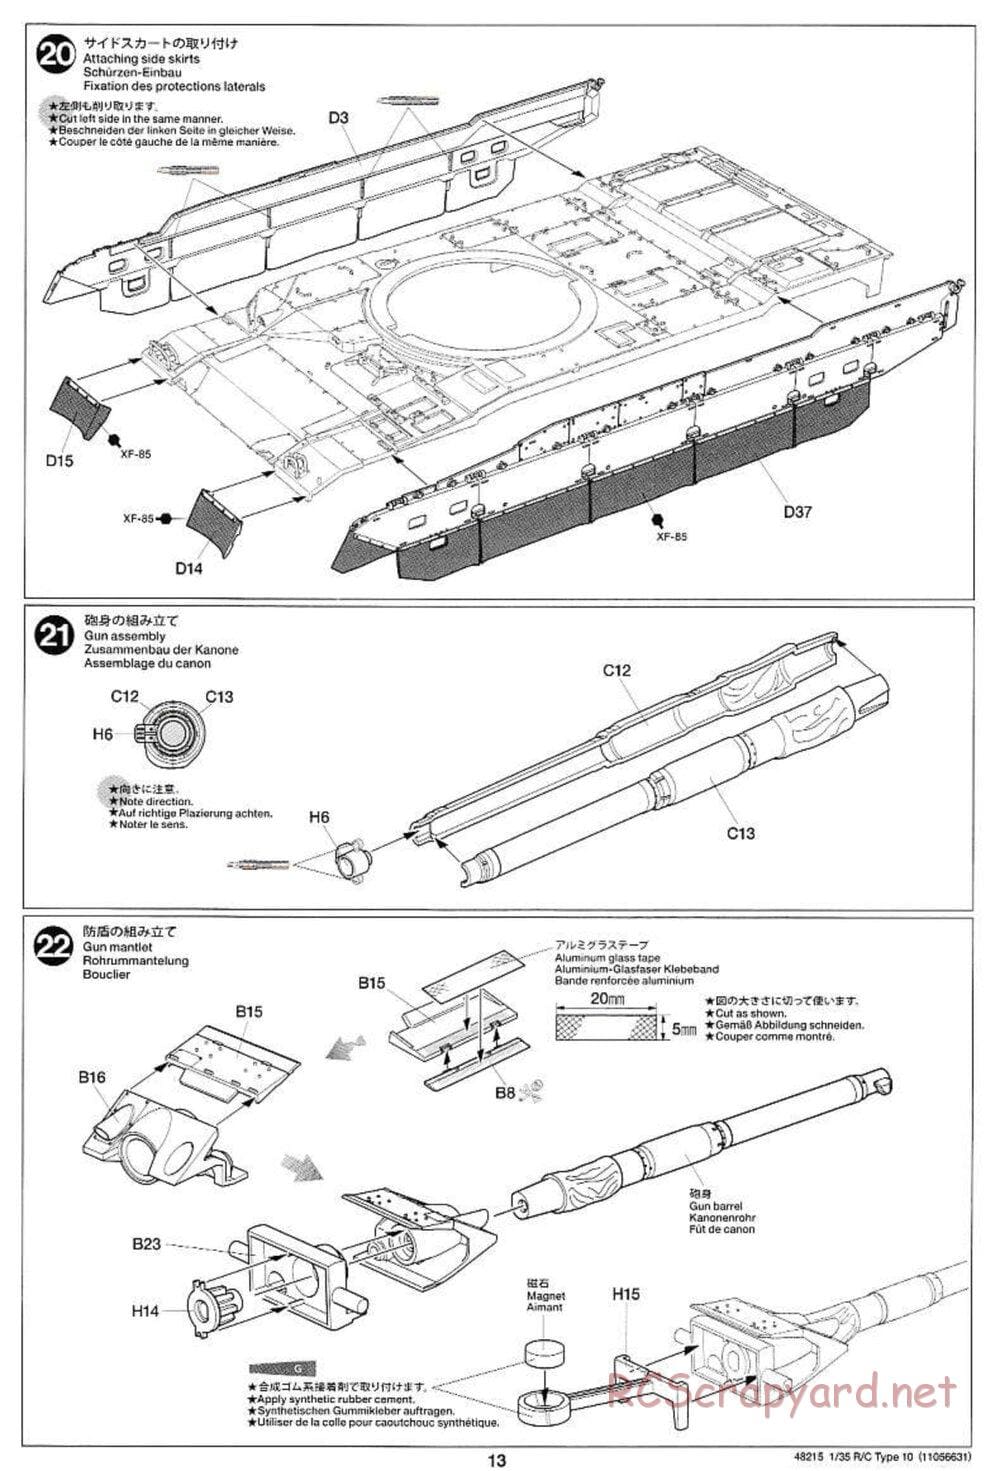 Tamiya - JGSDF Type 10 Tank - 1/35 Scale Chassis - Manual - Page 13